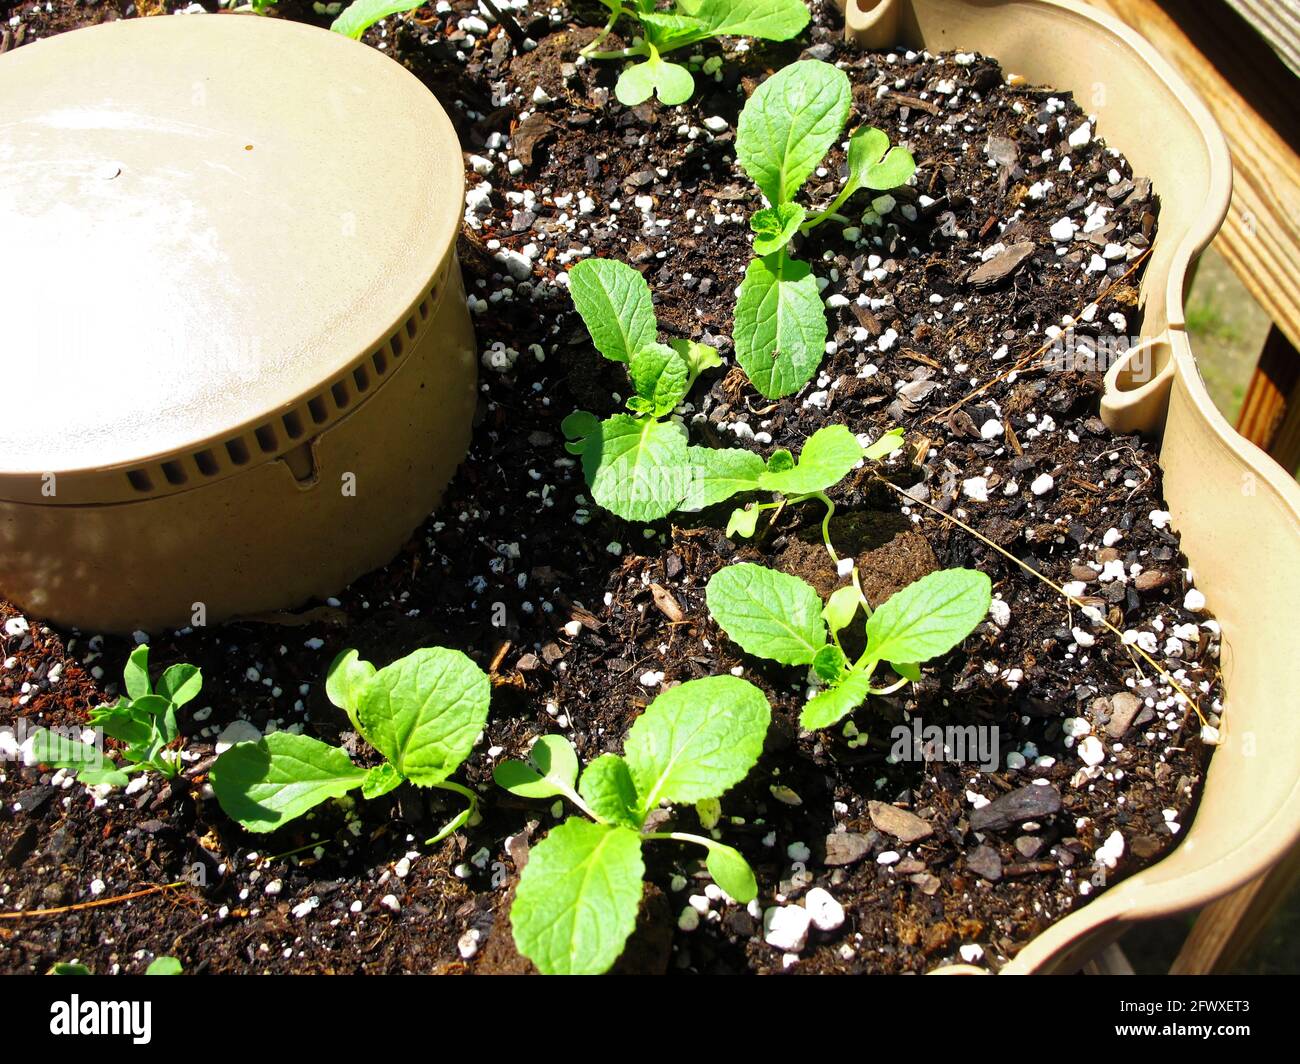 Napa cabbage seedlings planted in a garden tower container. Stock Photo